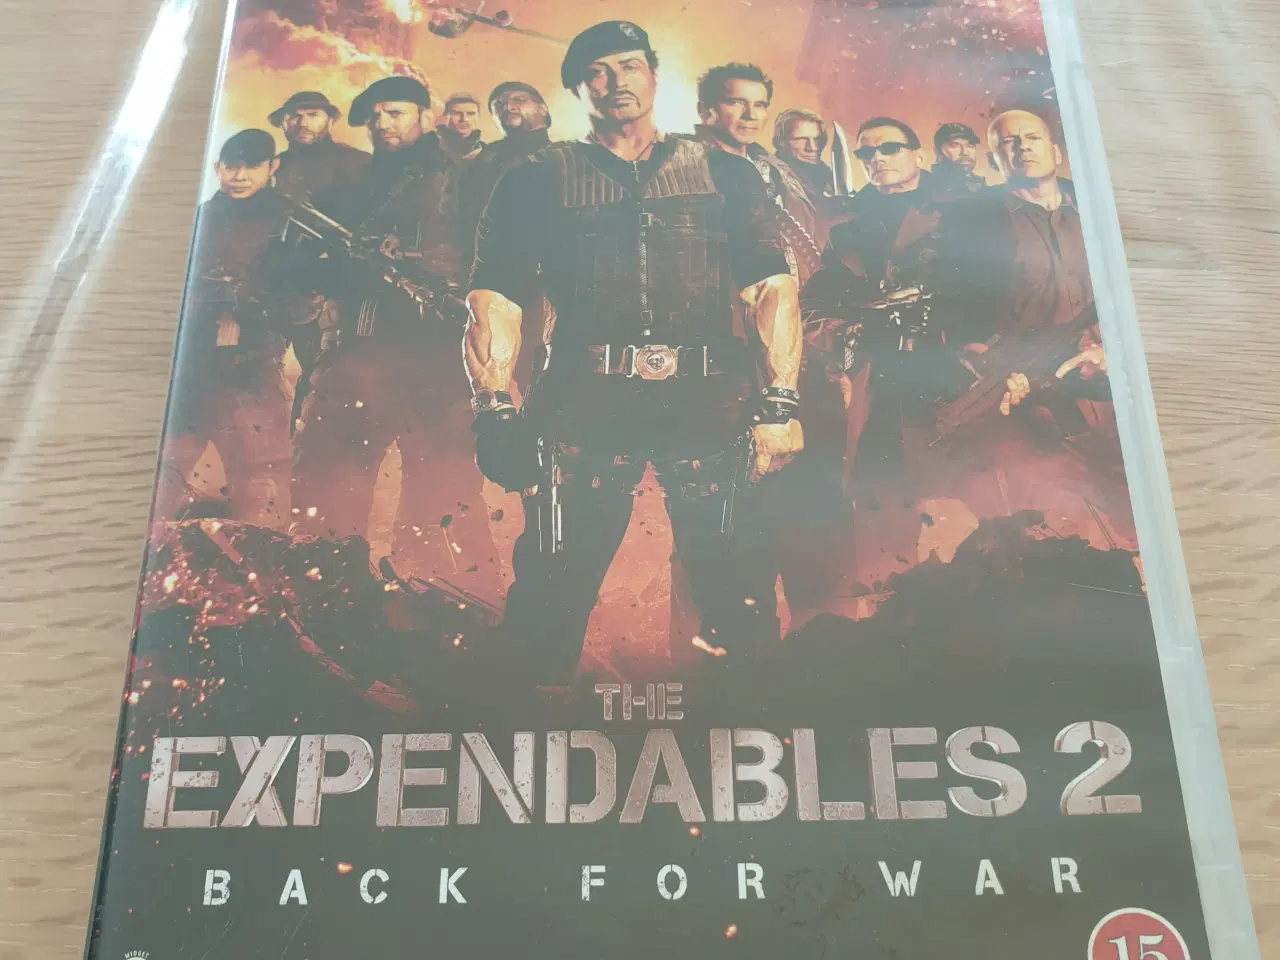 Billede 1 - The Expendables 2